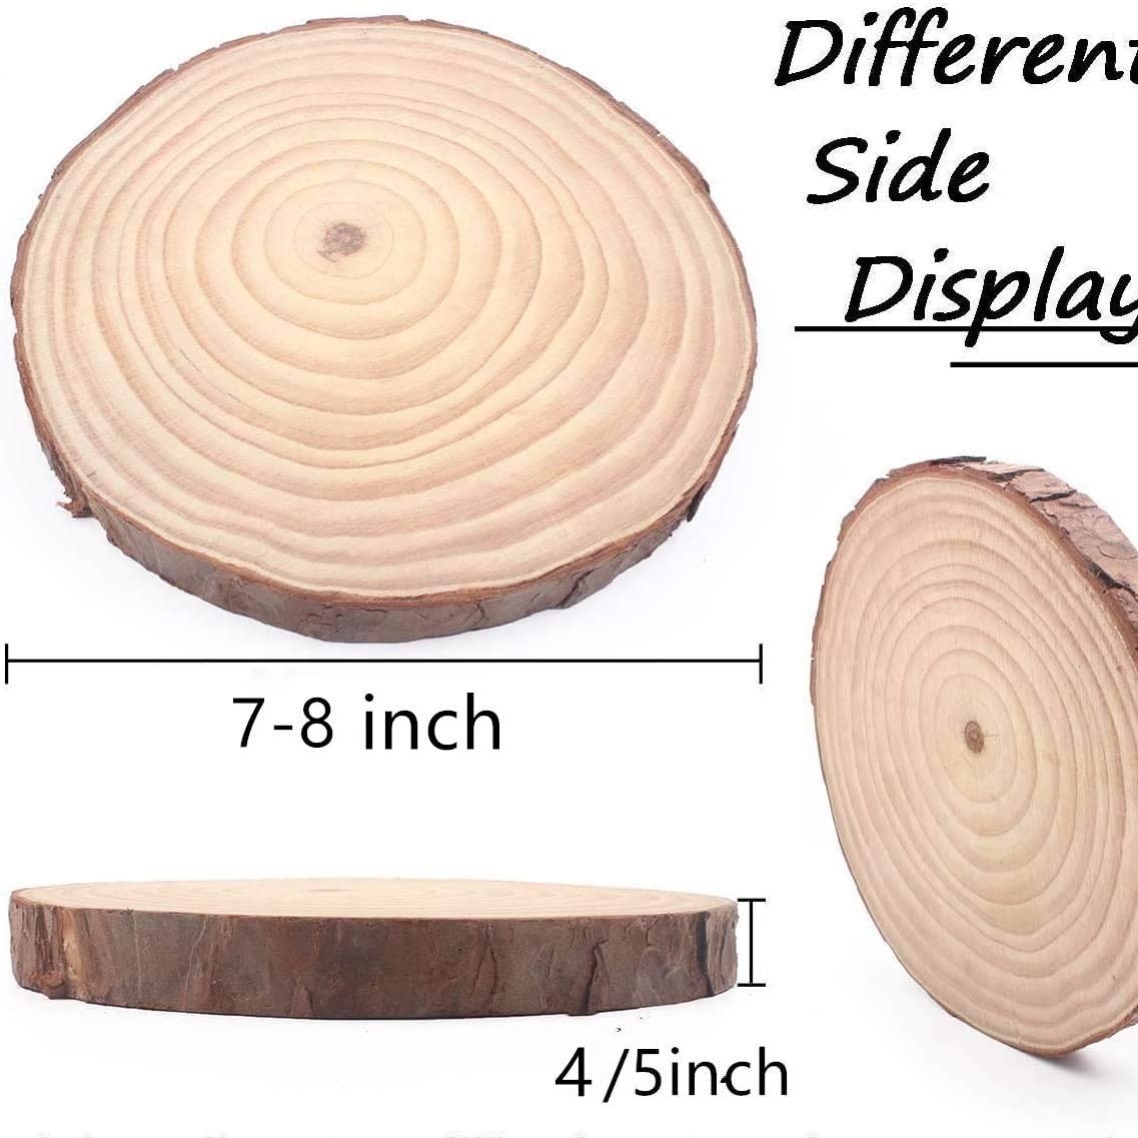 Natural Round Discs Rustic Wood Slices 4 Pcs 9-10 inch Unfinished Wood Kit Circles Crafts Tree Slices with Bark Log Discs for DIY Arts and Wedding